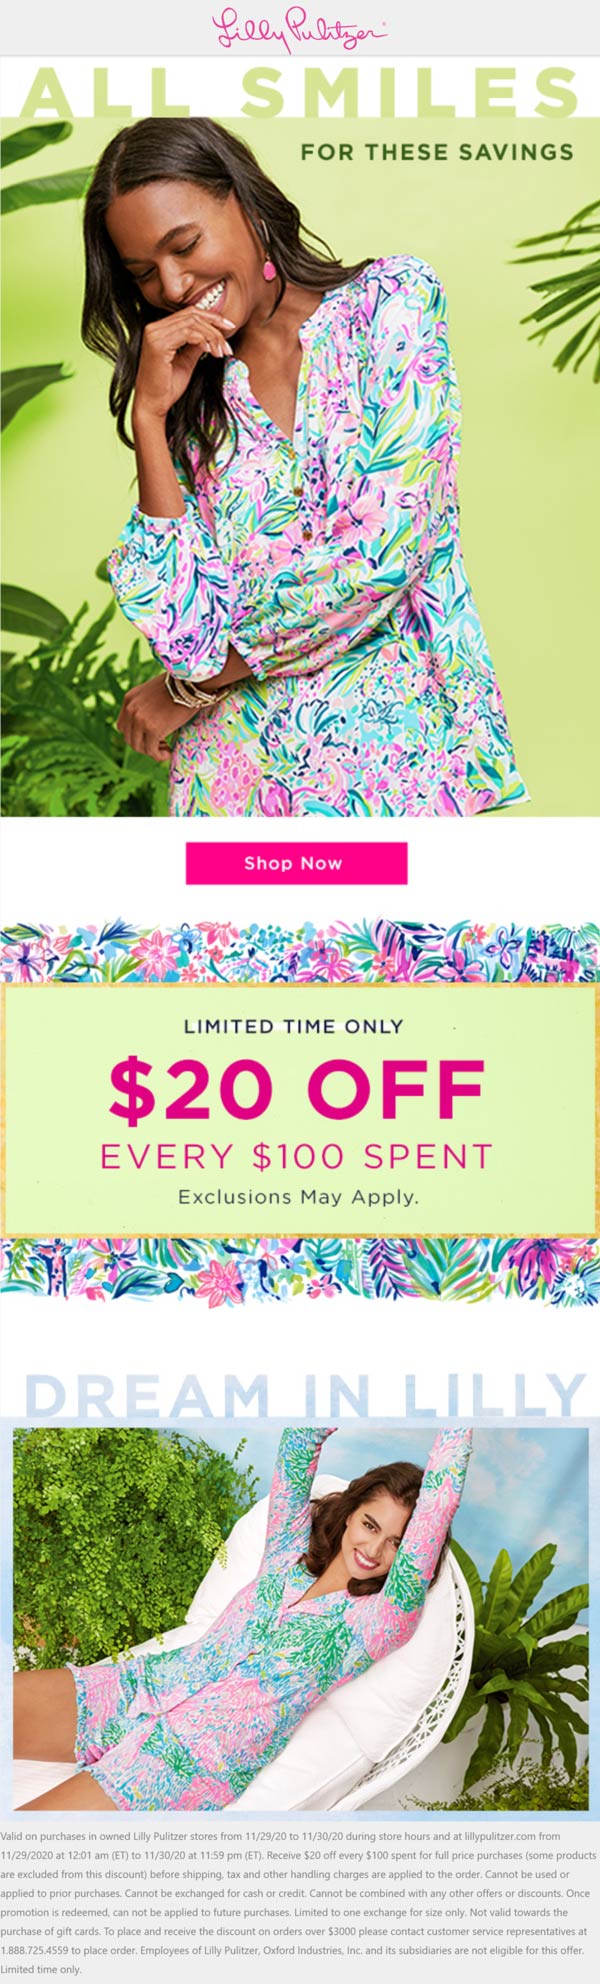 Lilly Pulitzer stores Coupon  $20 off every $100 today at Lilly Pulitzer #lillypulitzer 